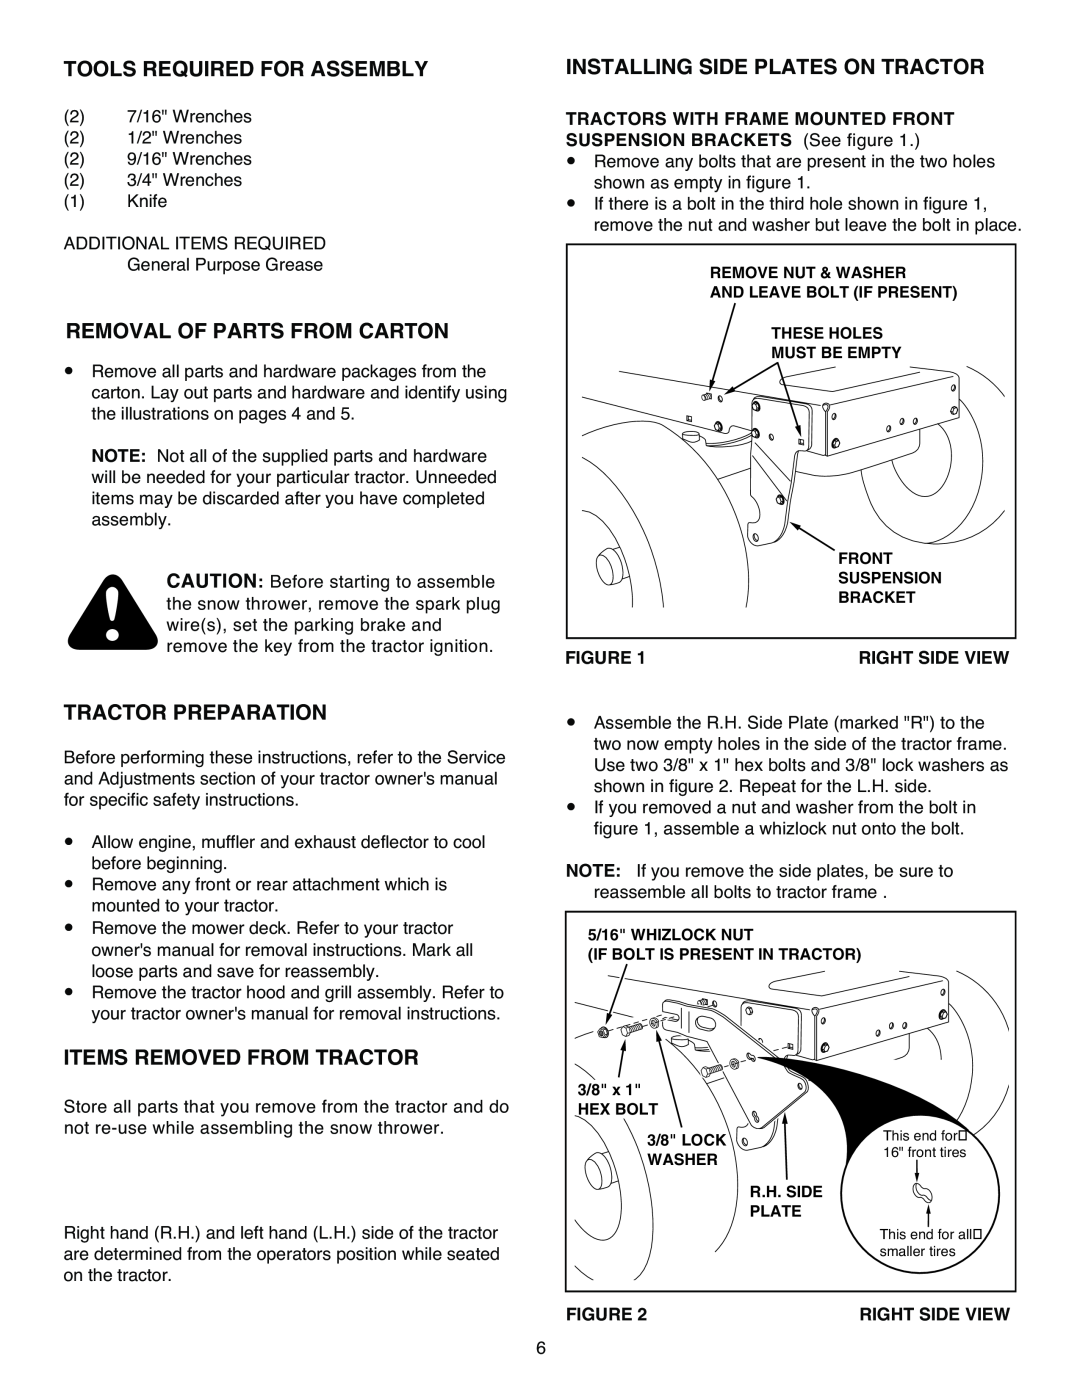 Sears 486.248392 owner manual Tools Required For Assembly, Removal Of Parts From Carton, Tractor Preparation 